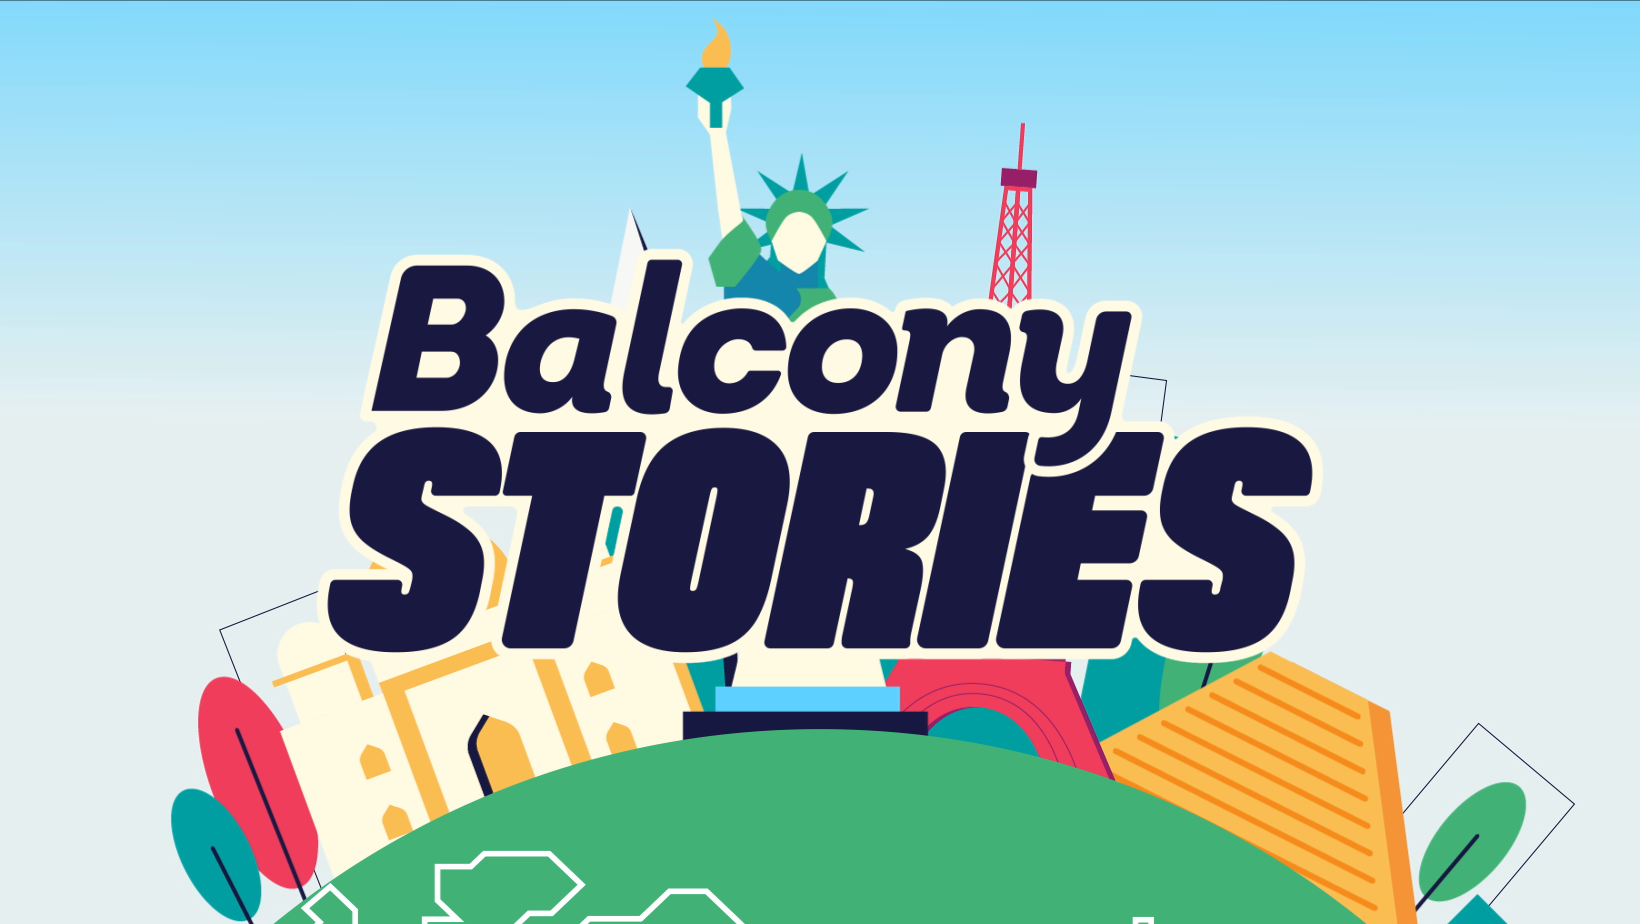 ViacomCBS International Studios launches balcony stories, first short form user generated content series